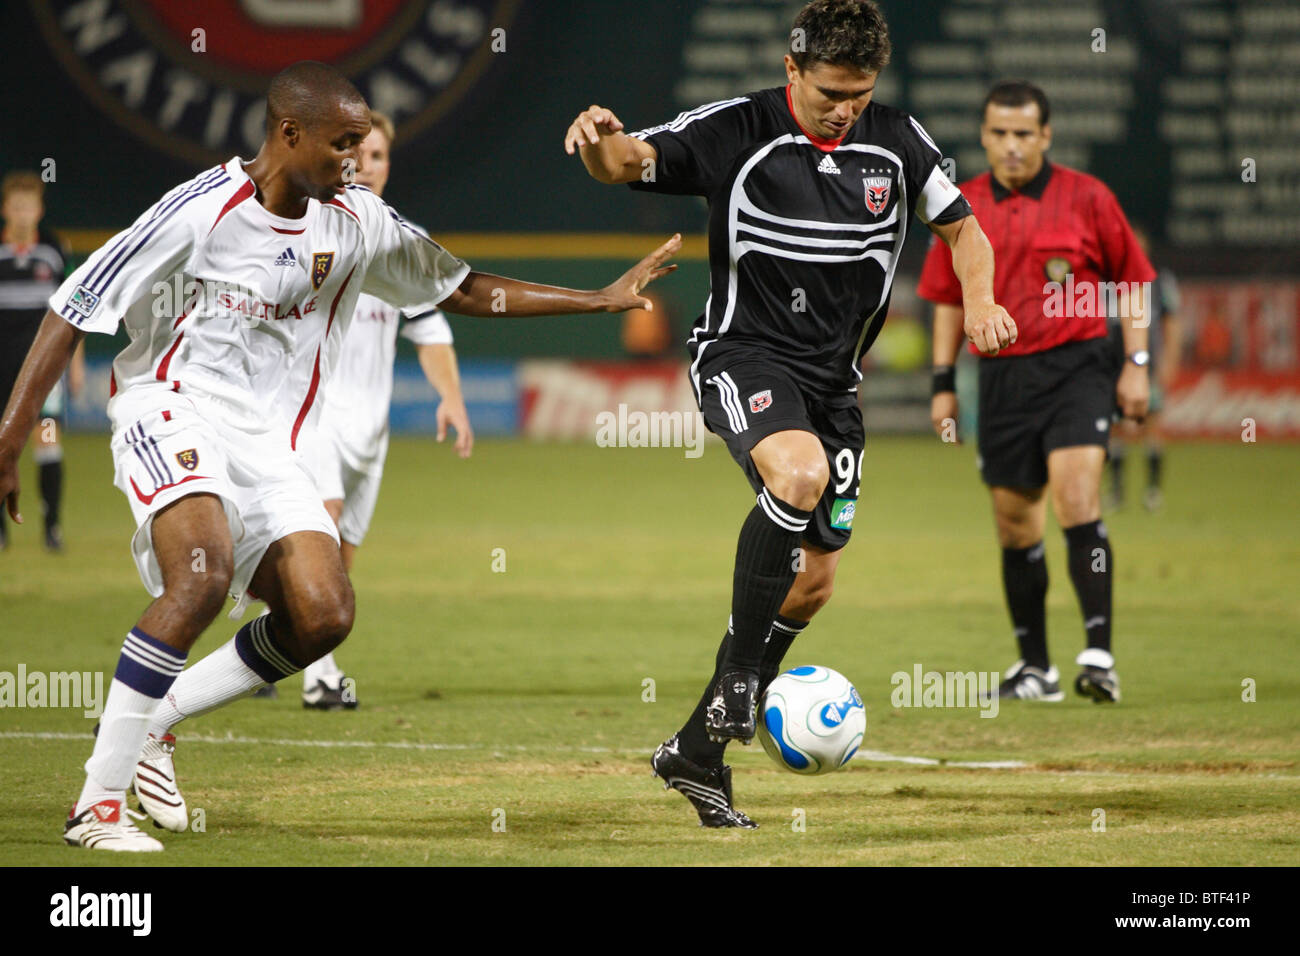 Jaime Moreno of DC United (r) controls the ball as Eddie Pope of Real Salt Lake (l) defends during a Major League Soccer match. Stock Photo